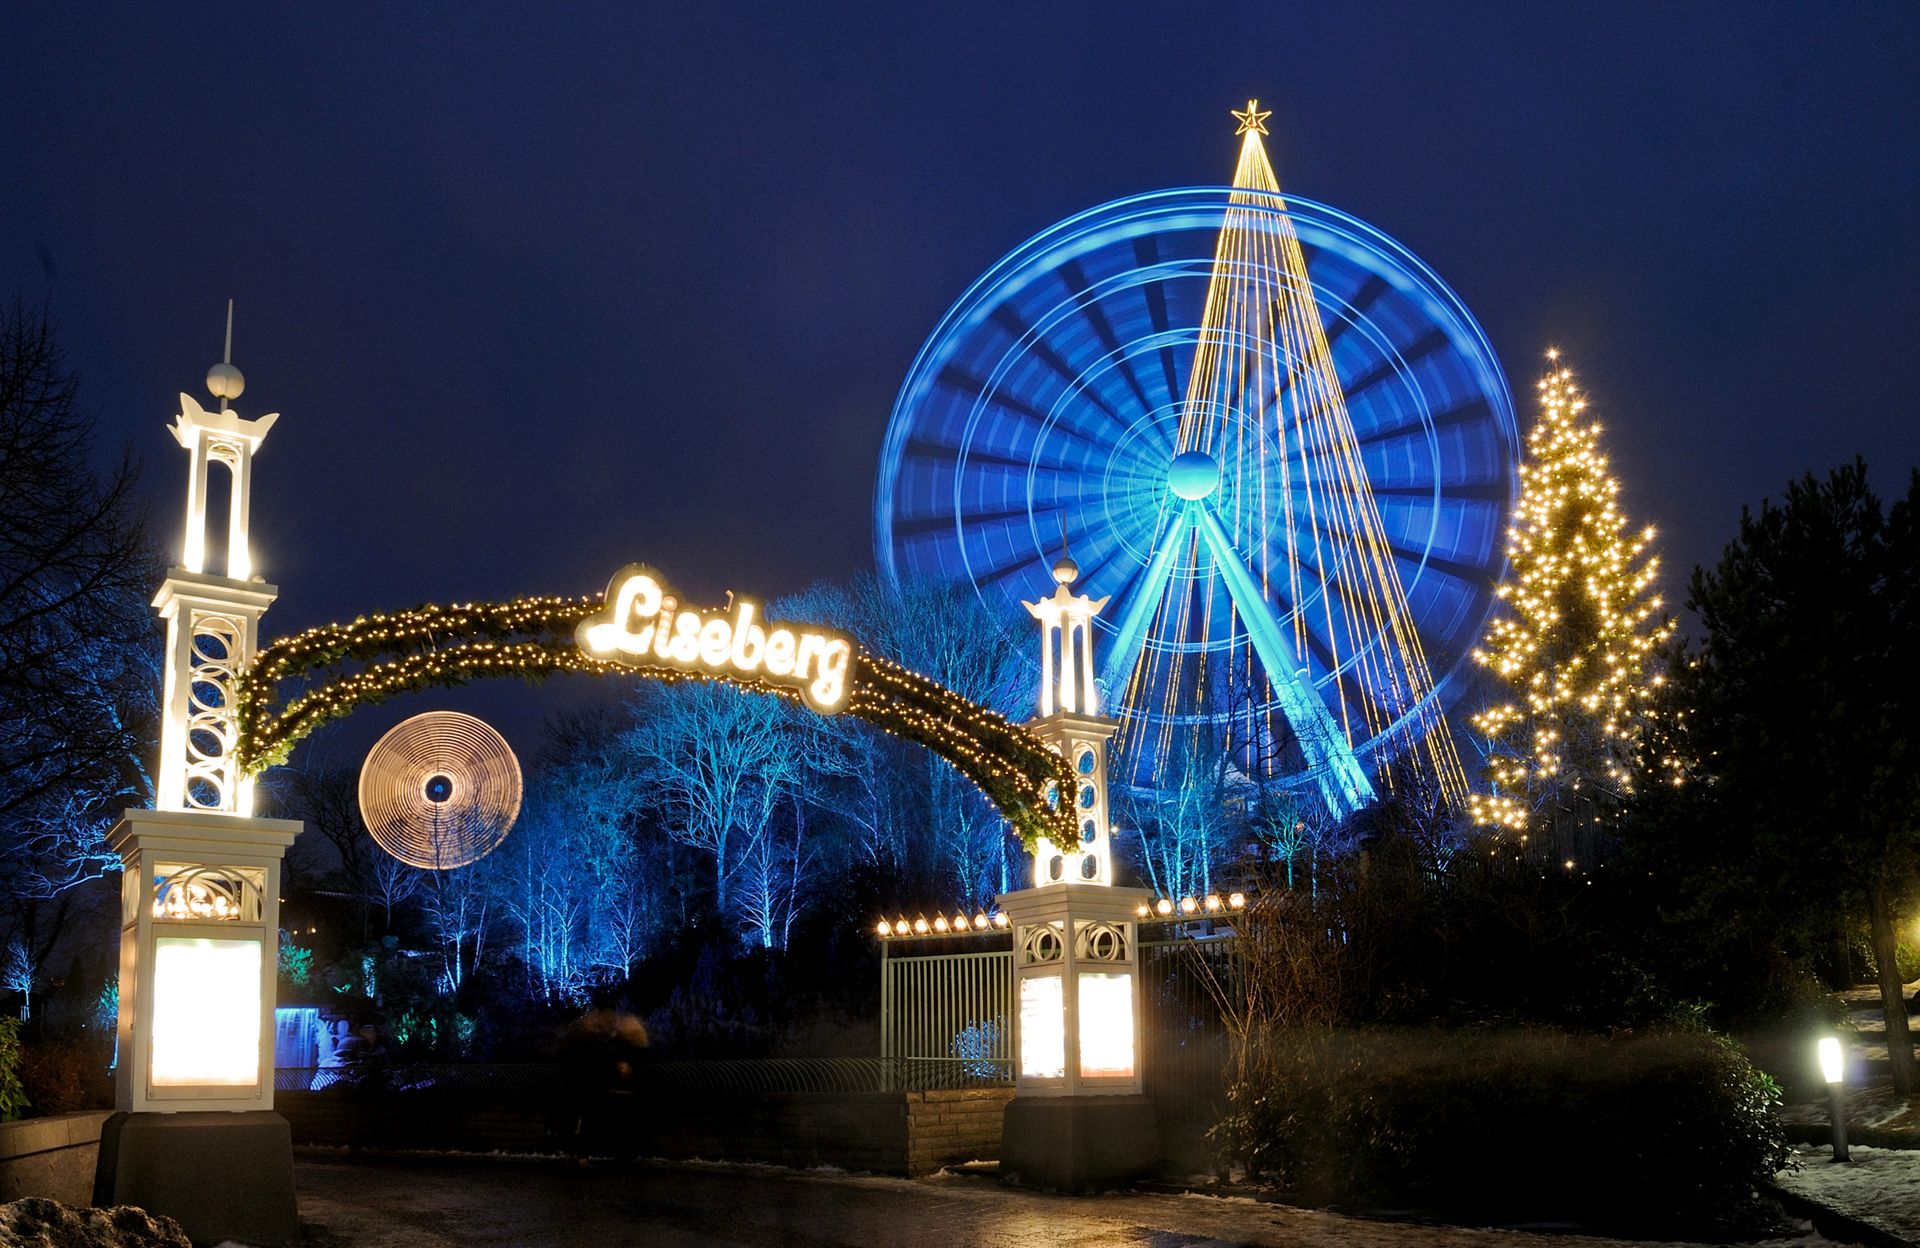 The Liseberg park entrance with a ferris wheel and Christmas lights in the background.